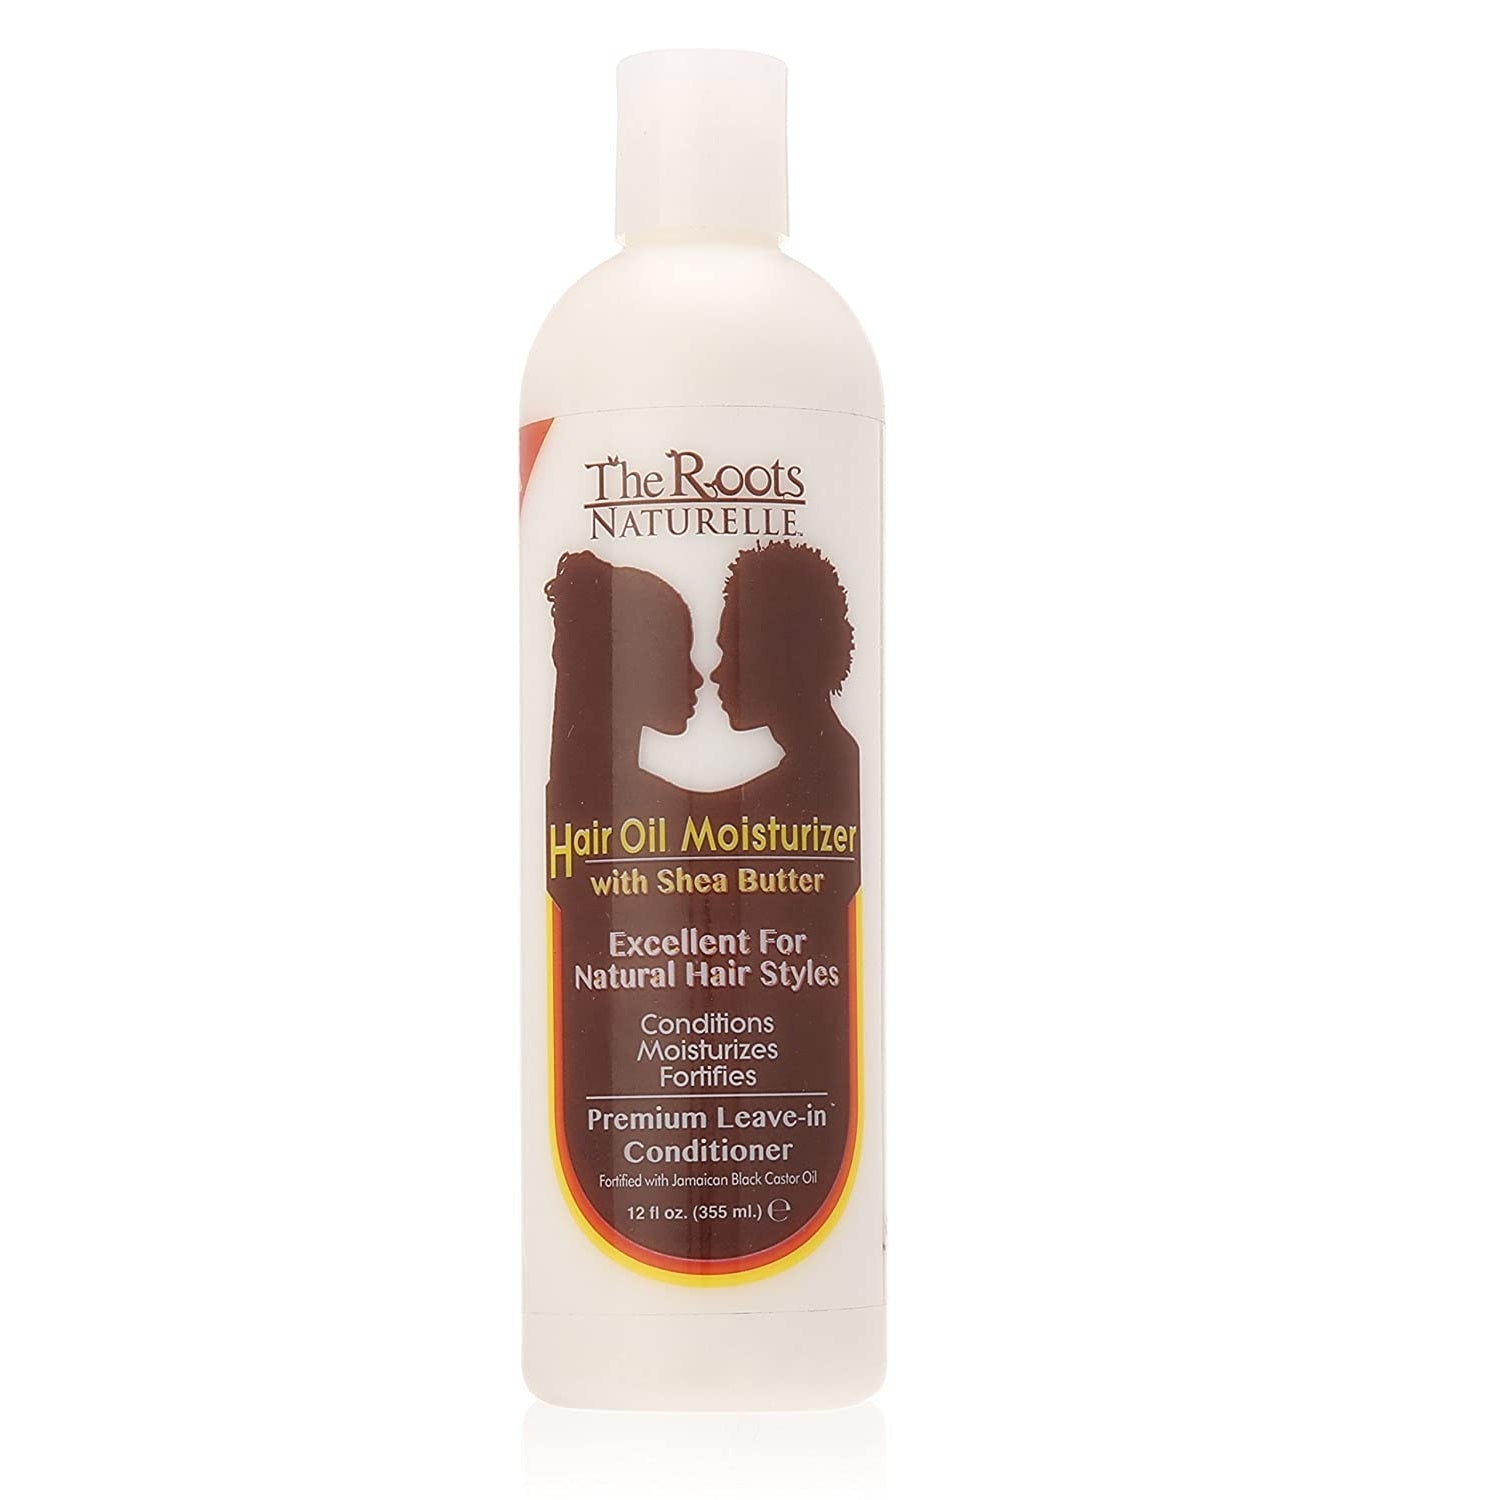 The Roots Naturelle Hair Oil Moisturizer with Shea Butter